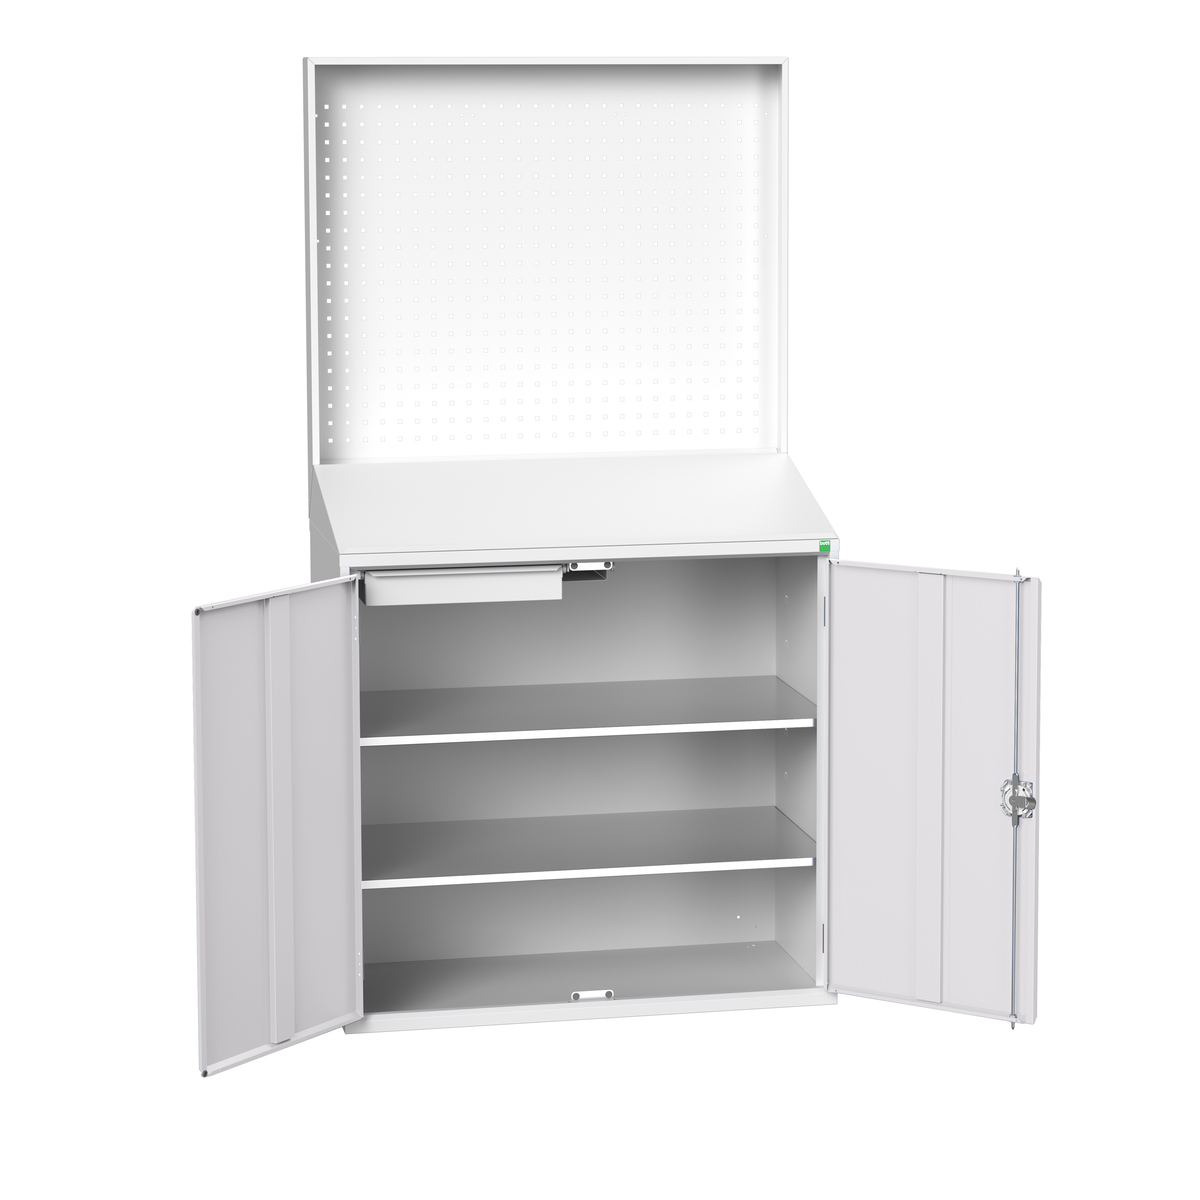 16929216.16 - verso economy lectern with backpanel